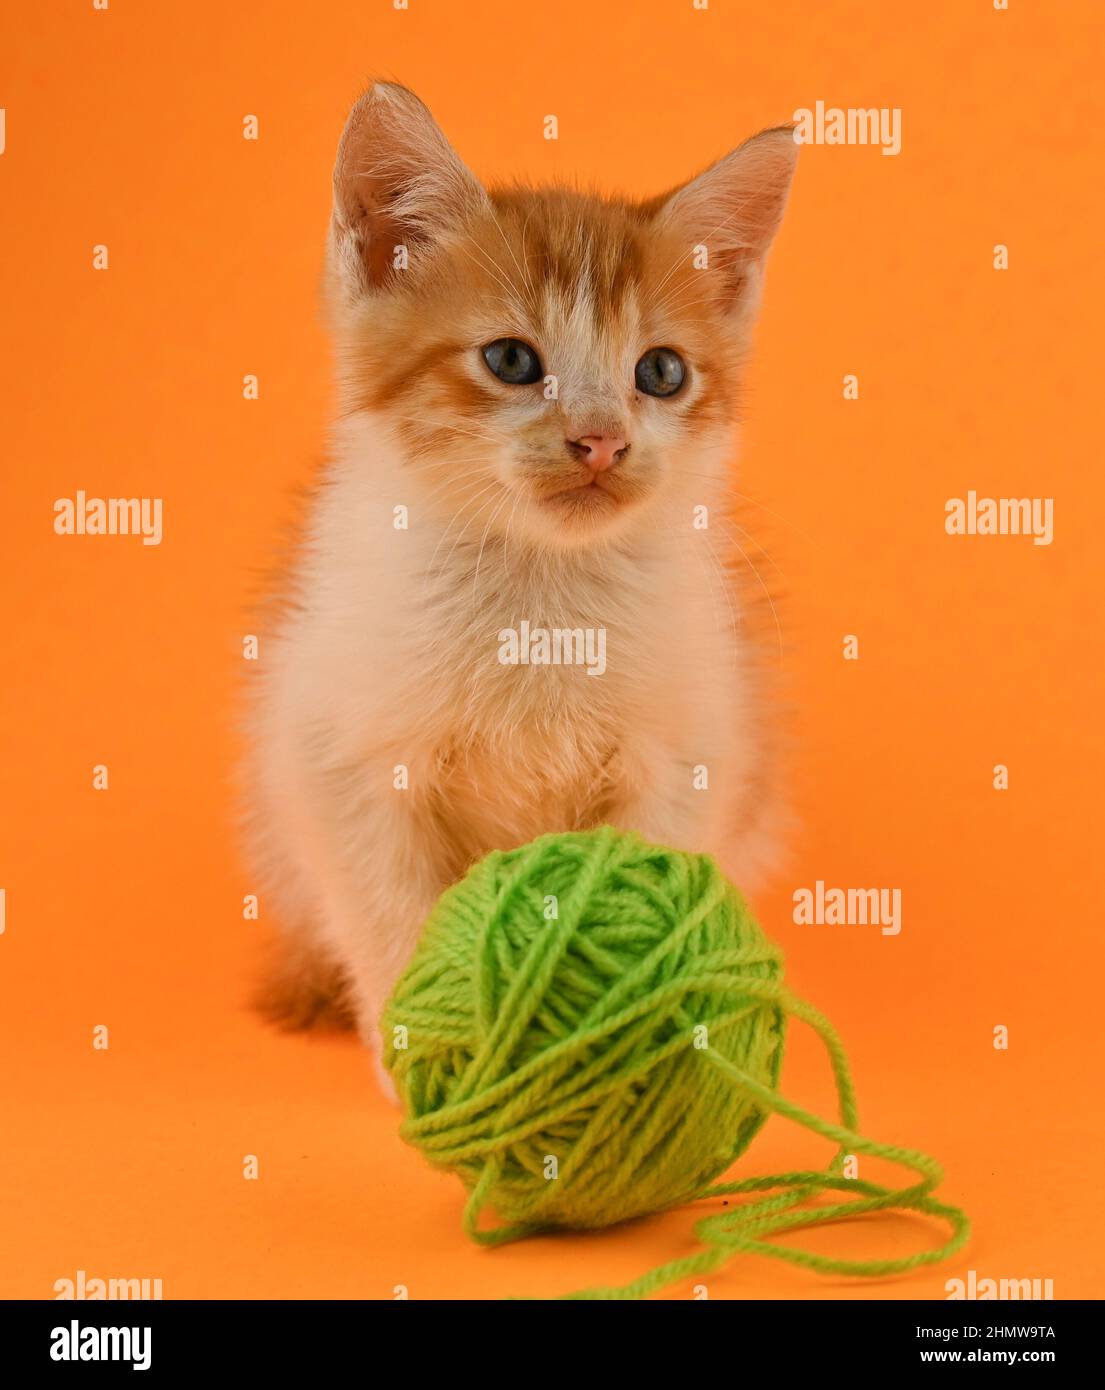 Photo shows a fluffy kitten in orange and white color. The background is orange purple. The kitten looks directly into the camera. There are space for Stock Photo